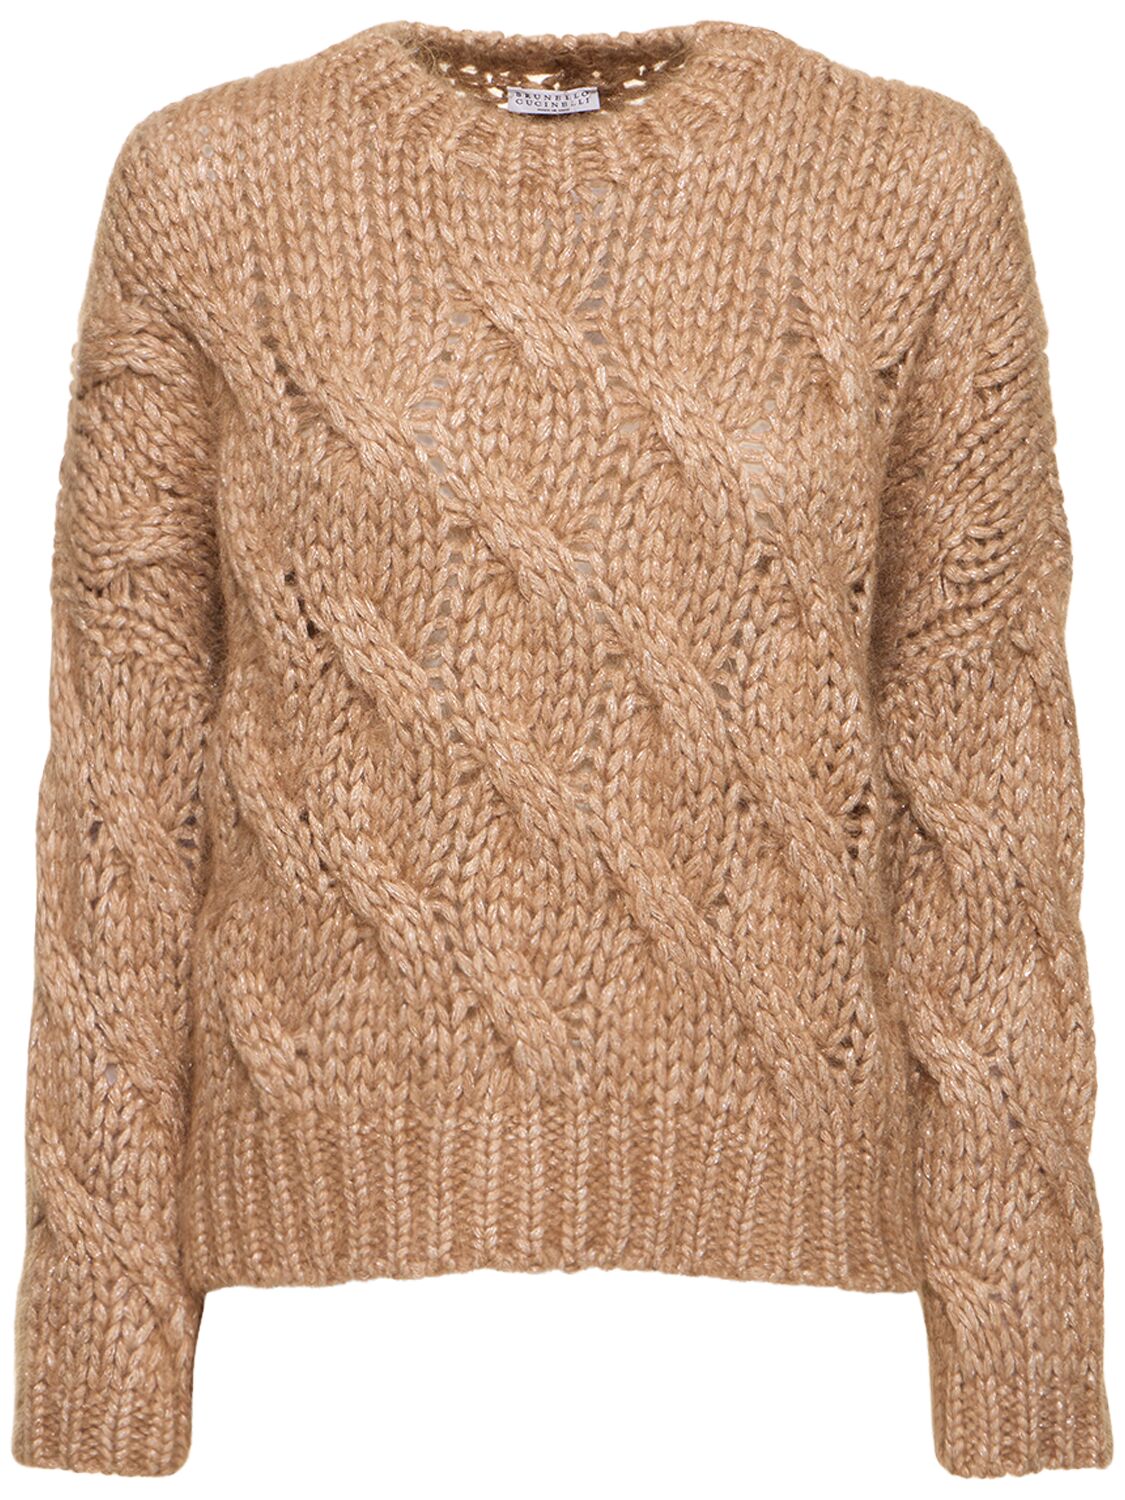 Image of Mohair Blend Braided Knit Sweater